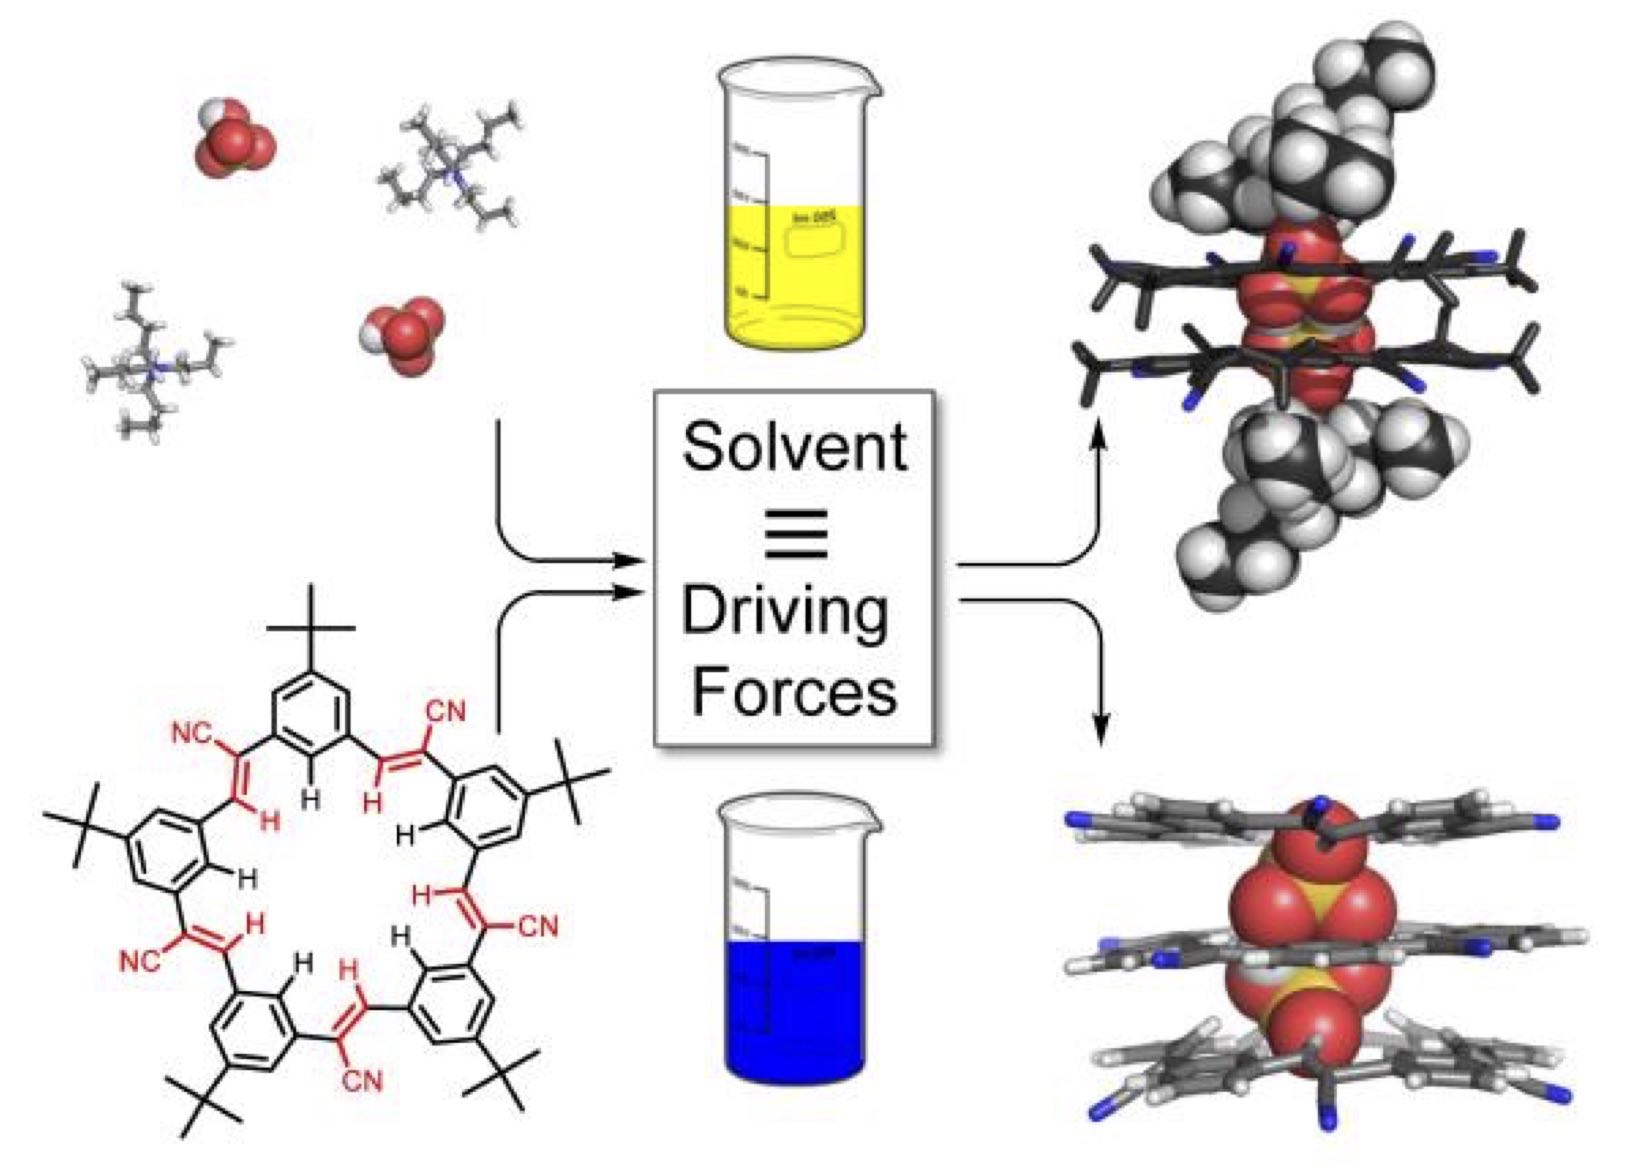 Ion-pairing and Co-facial Stacking Drive High-fidelity Bisulfate Assembly with Cyanostar Macrocyclic Hosts